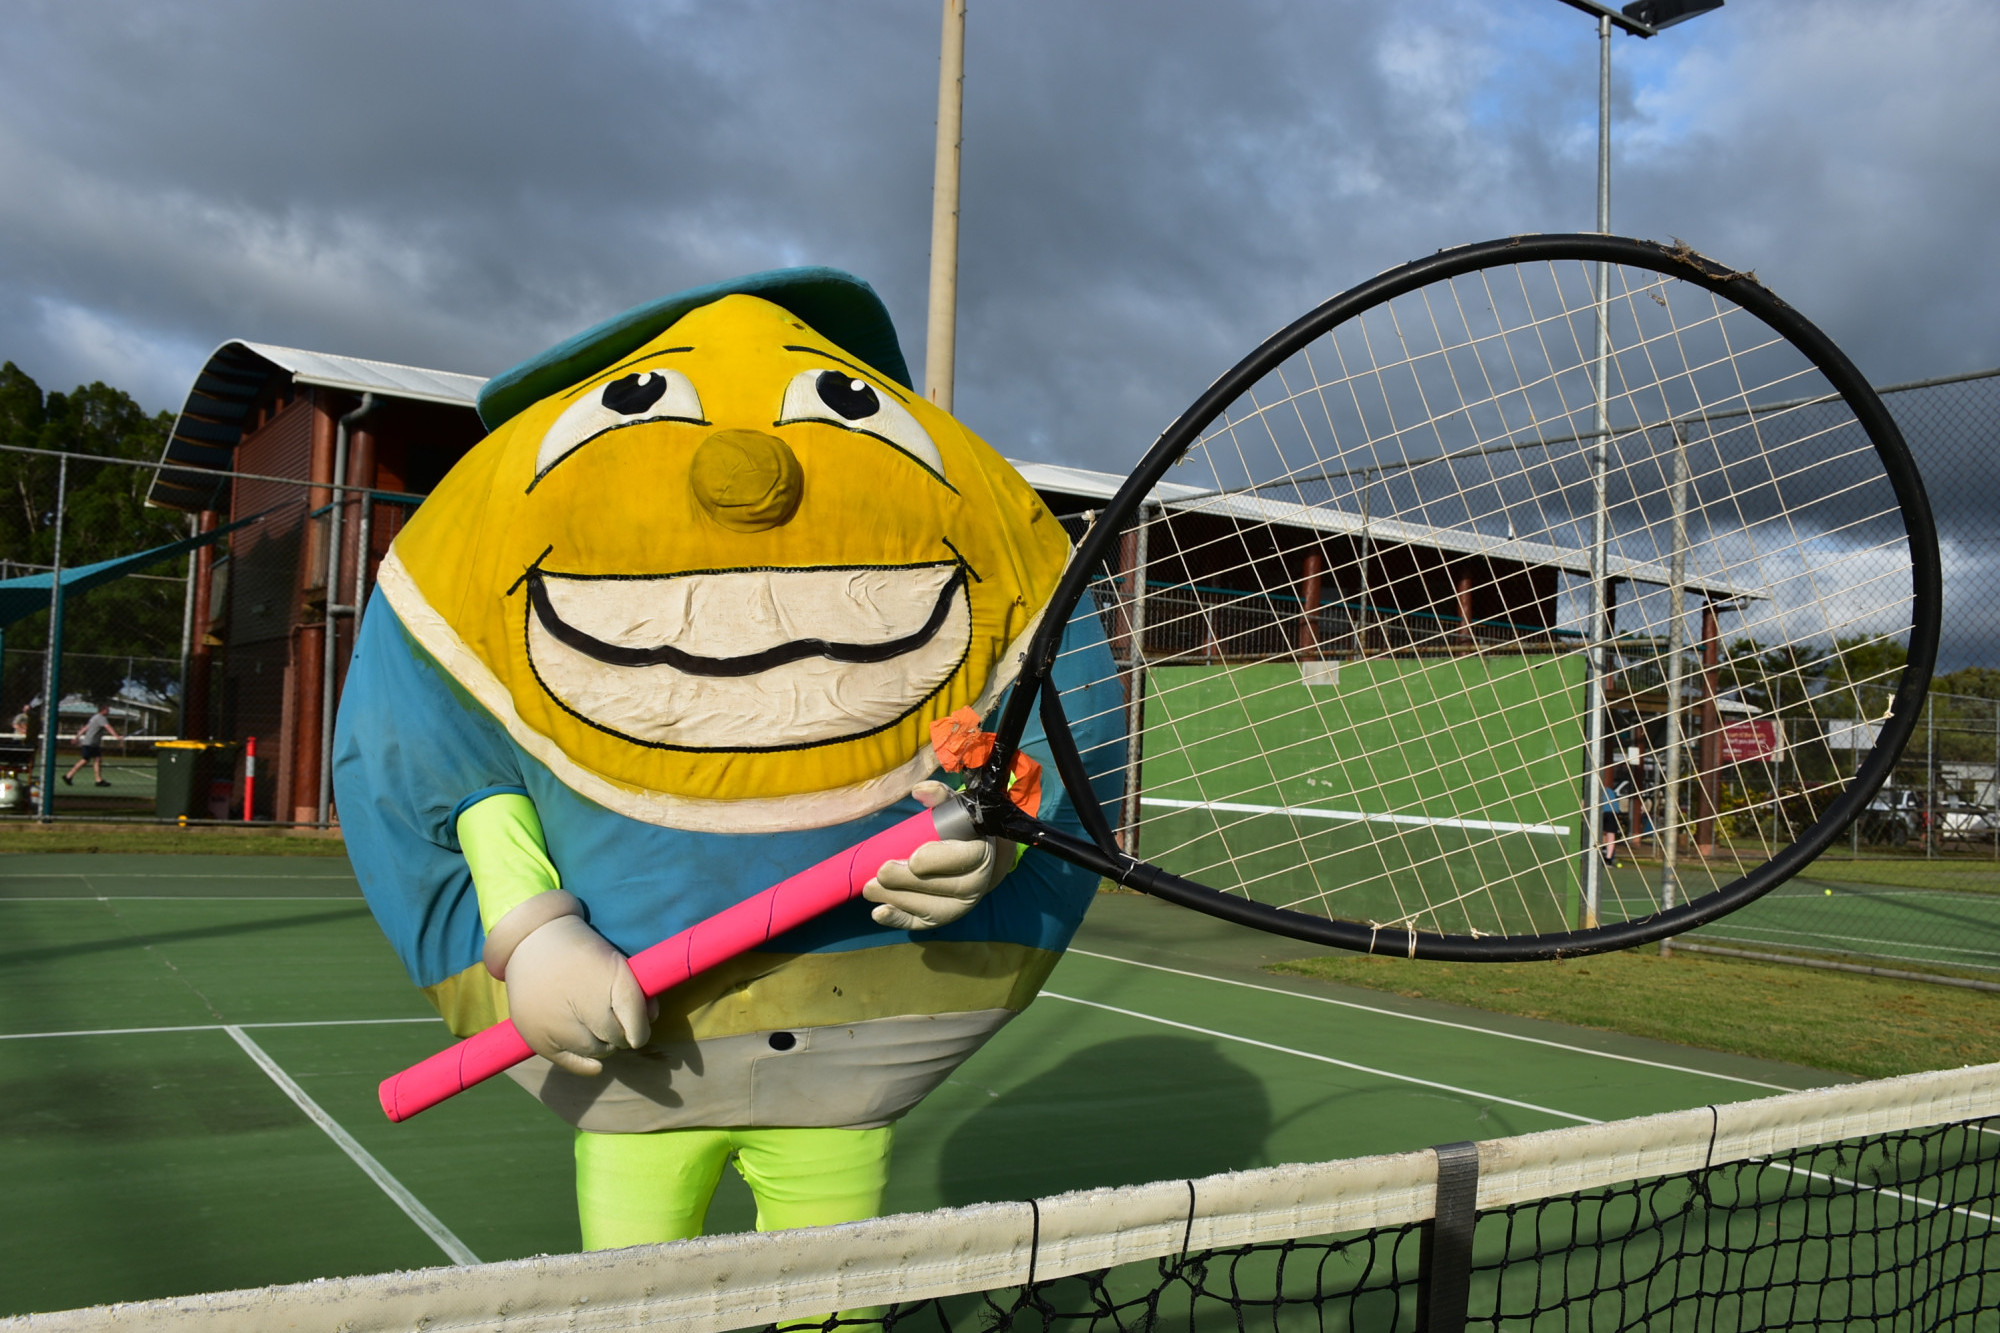 The Mareeba Tennis Club is encouraging new and experienced tennis players to come along to their open day this Saturday.